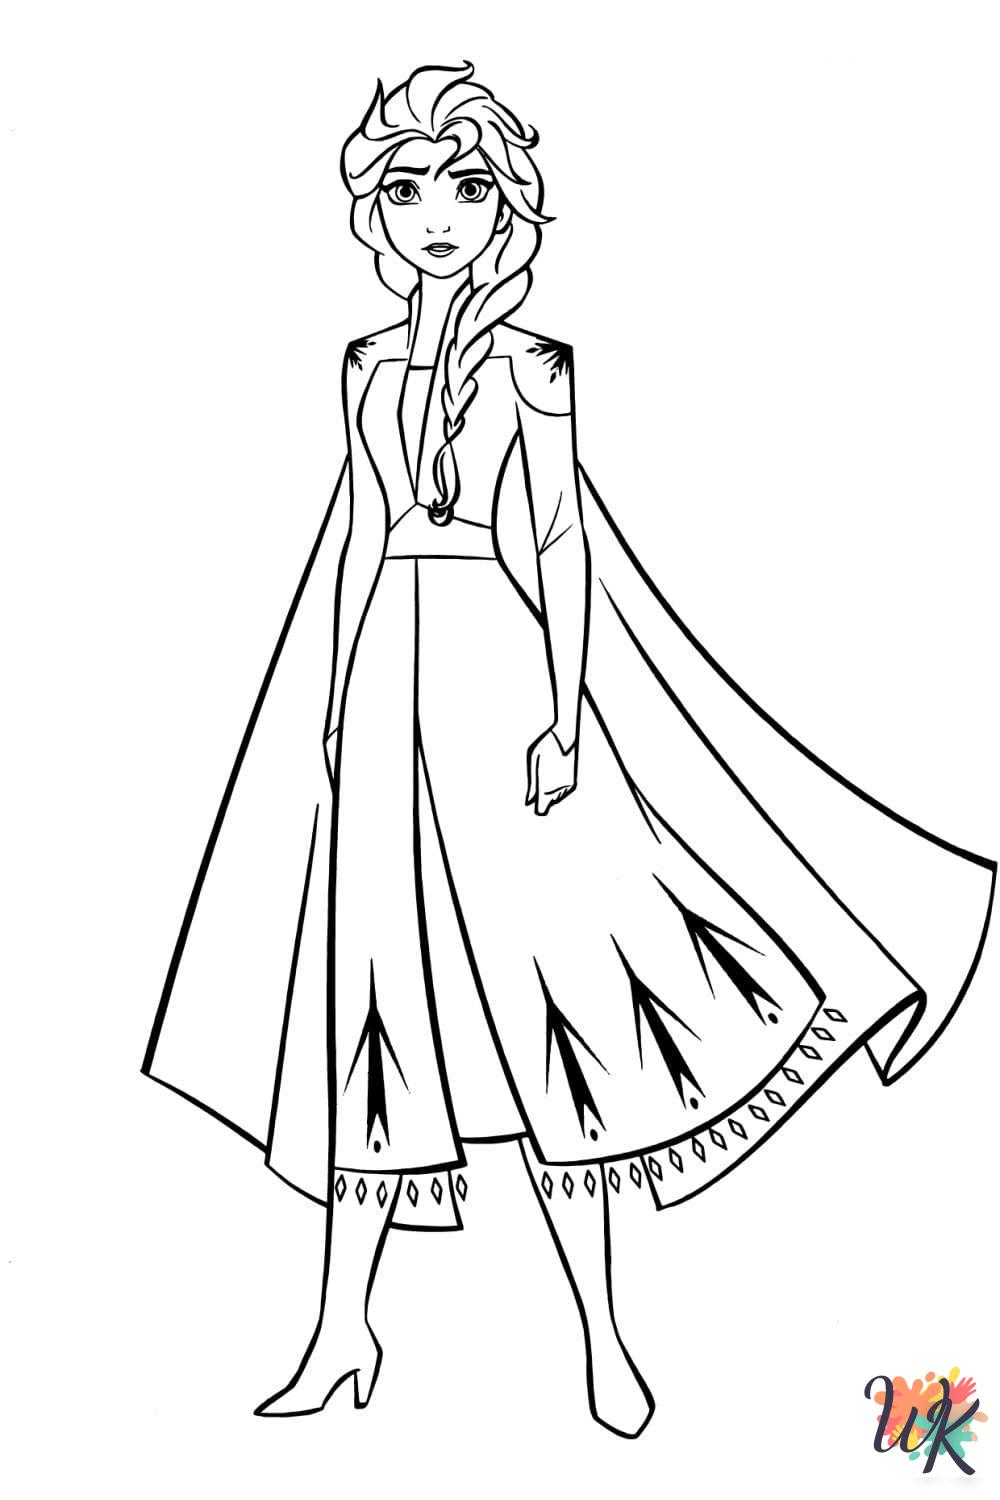 Elsa coloring pages for adults pdf